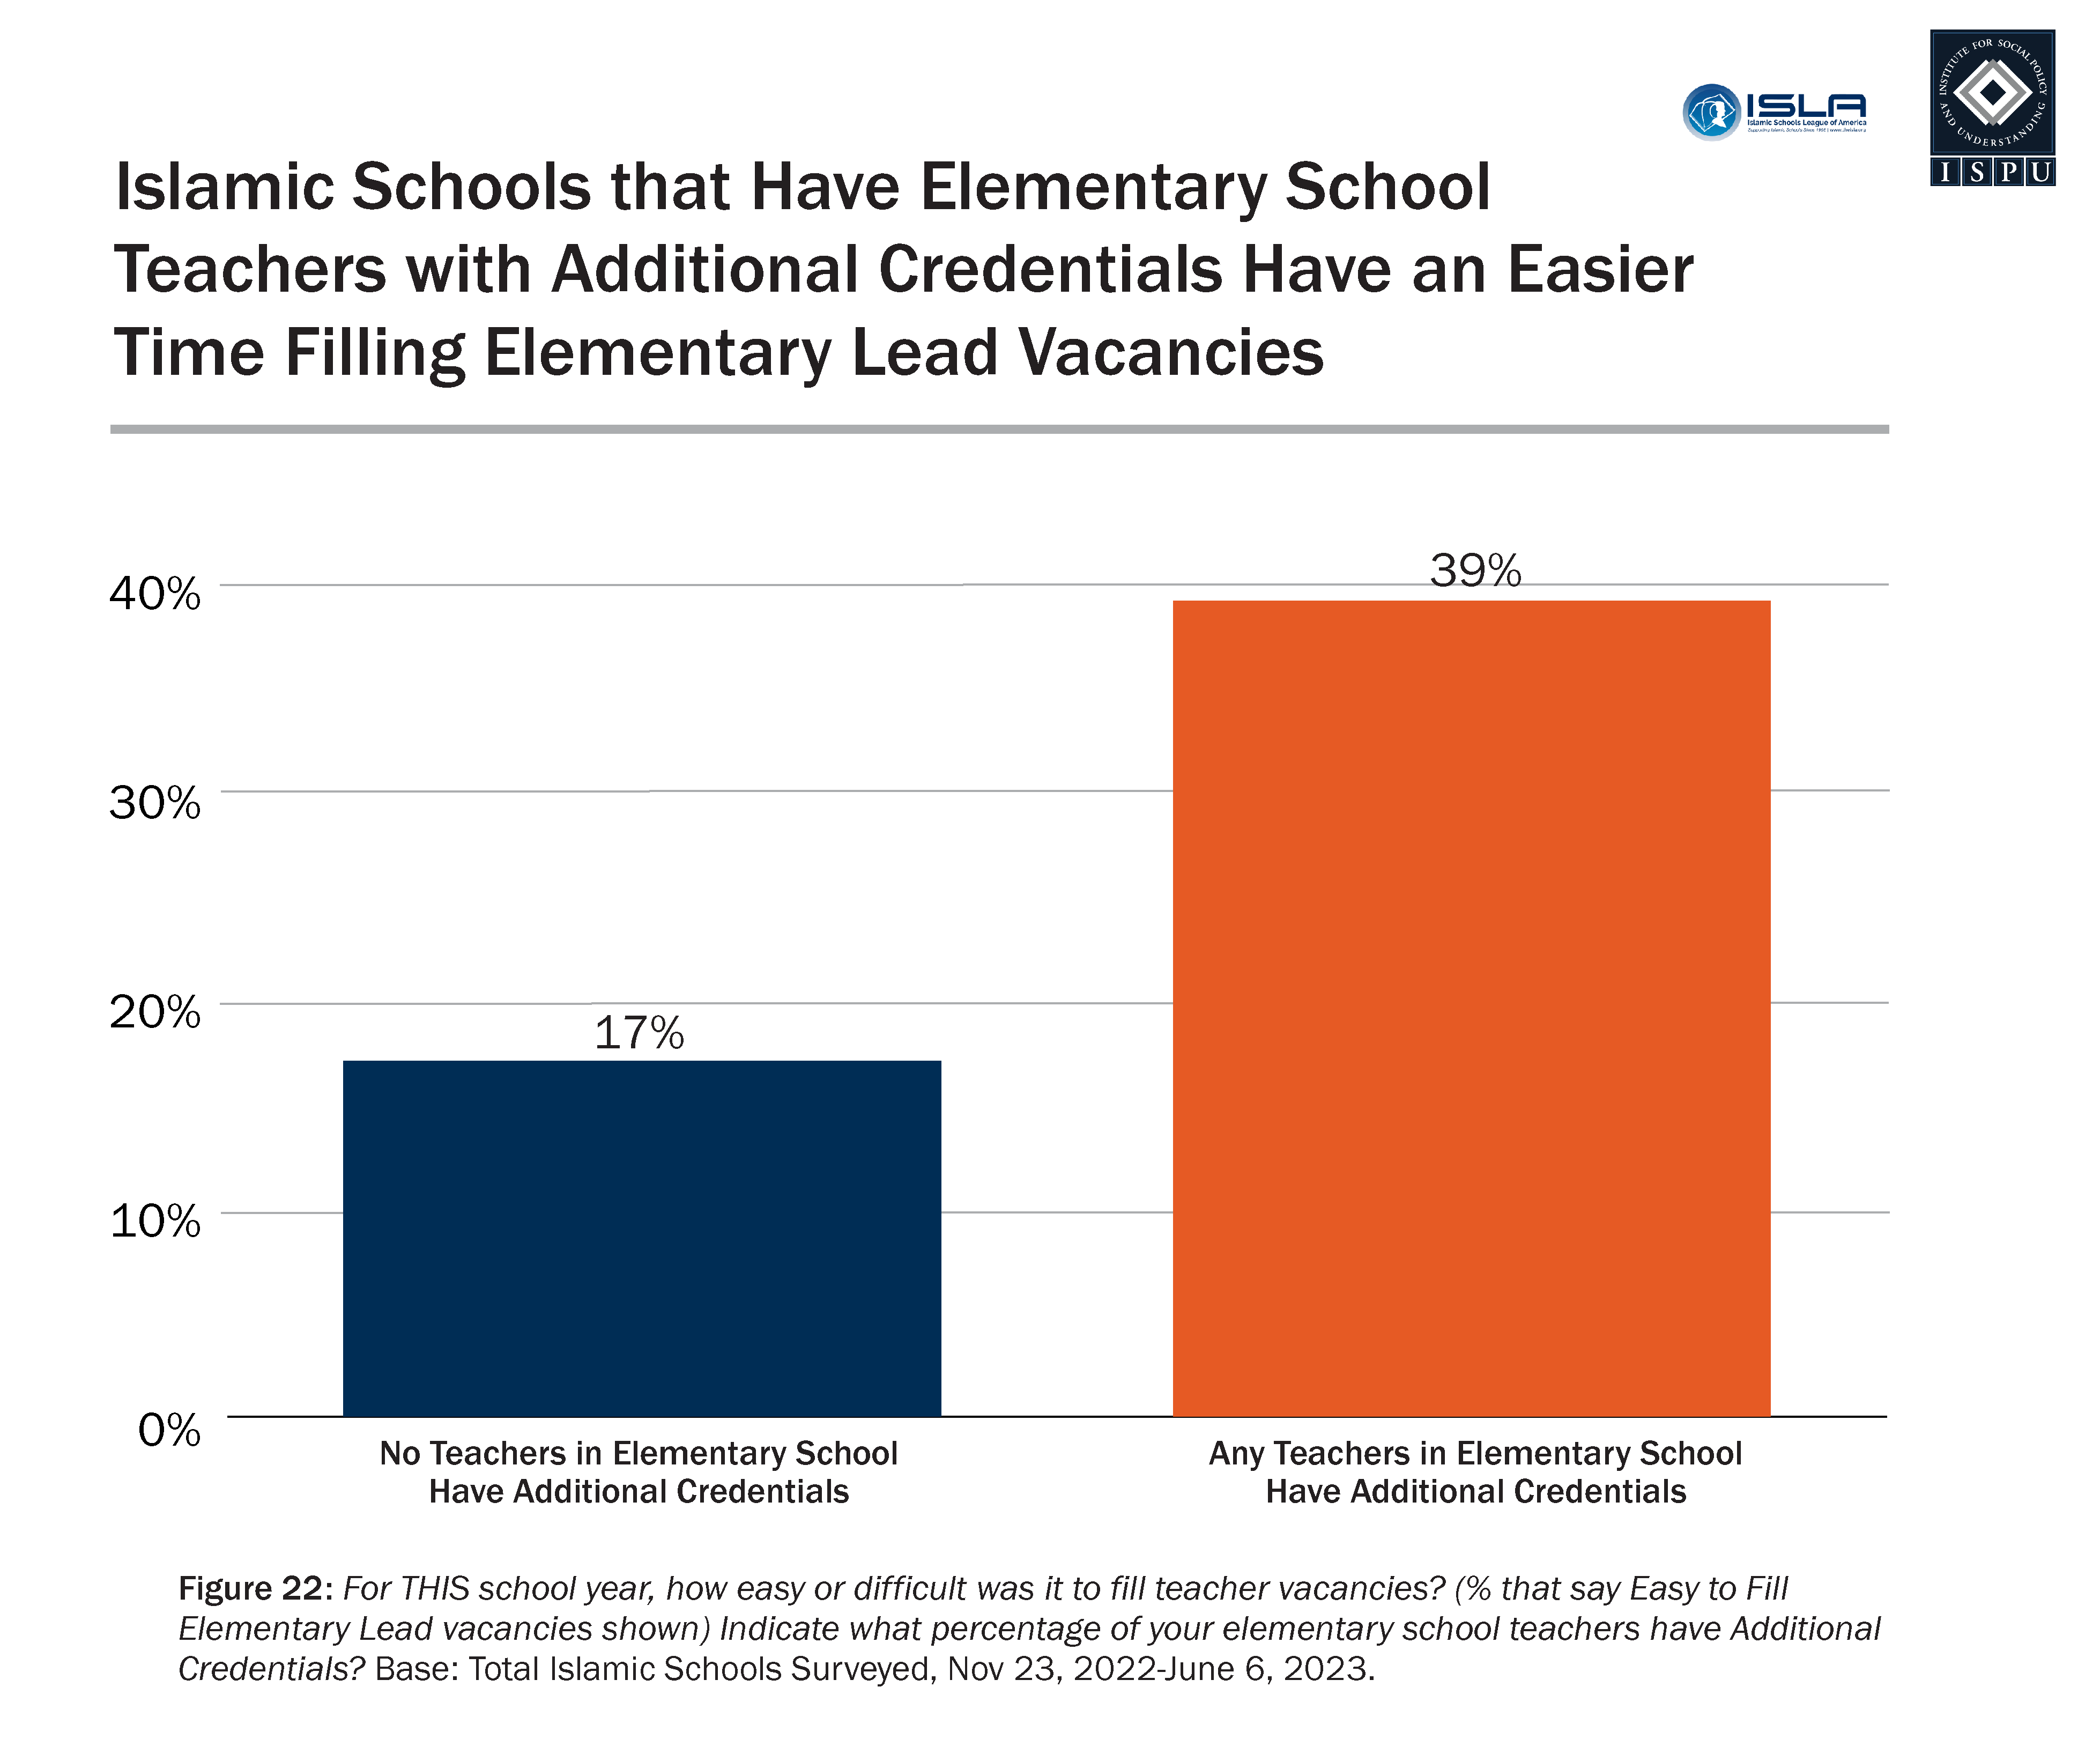 A bar chart comparing the ease of filling Elementary Lead vacancies based on the percentage of elementary school teachers in the school with additional credentialing.